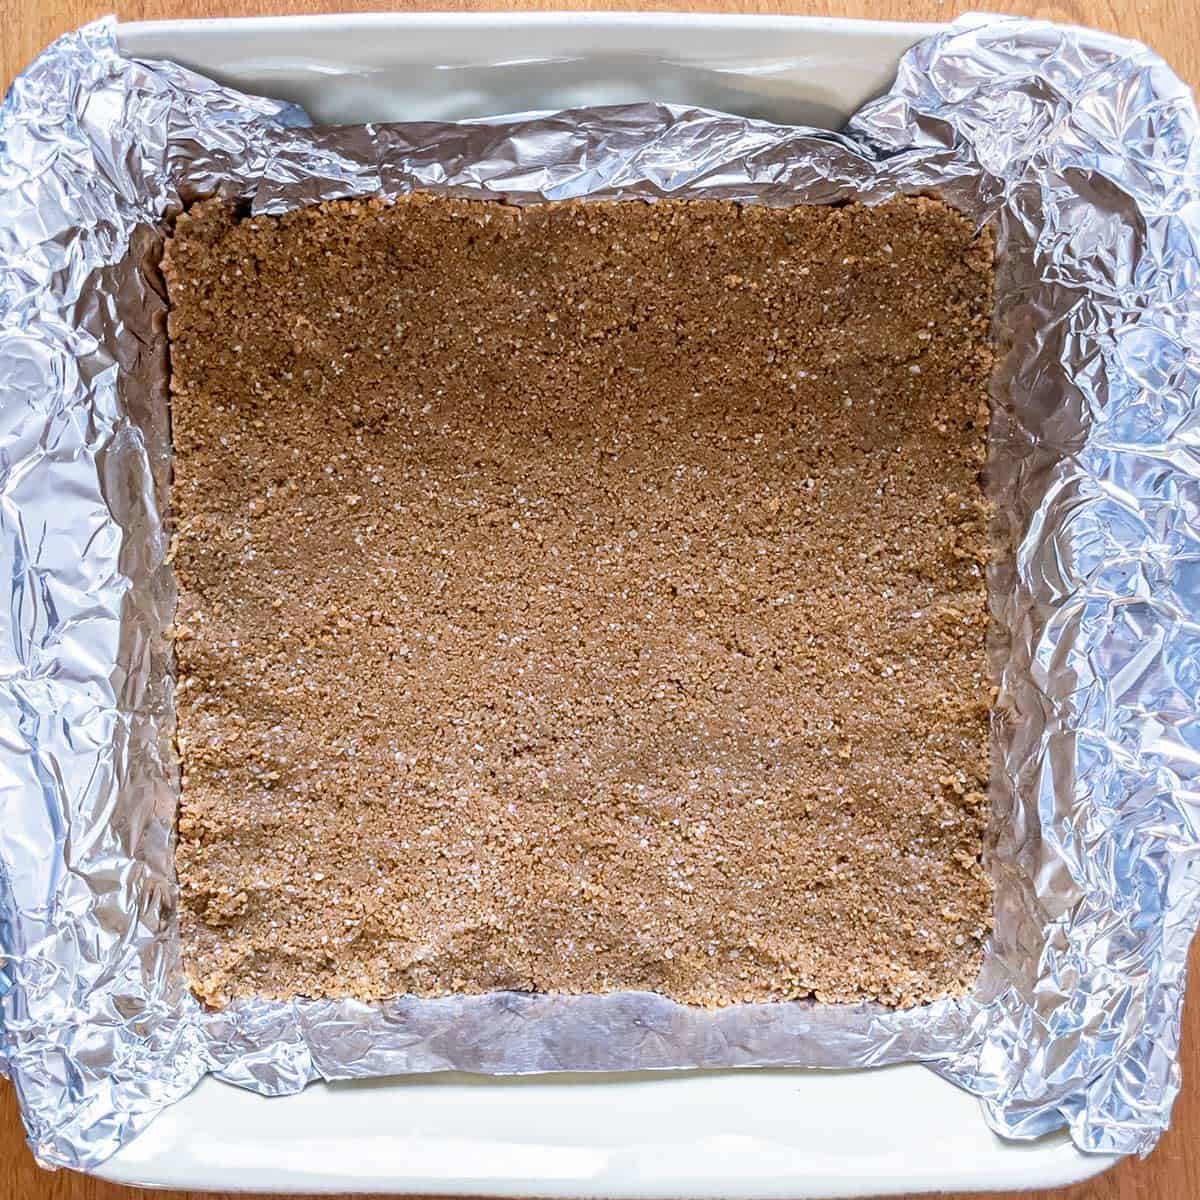 Graham cracker crust pressed onto the tin-foiled lined baking dish.